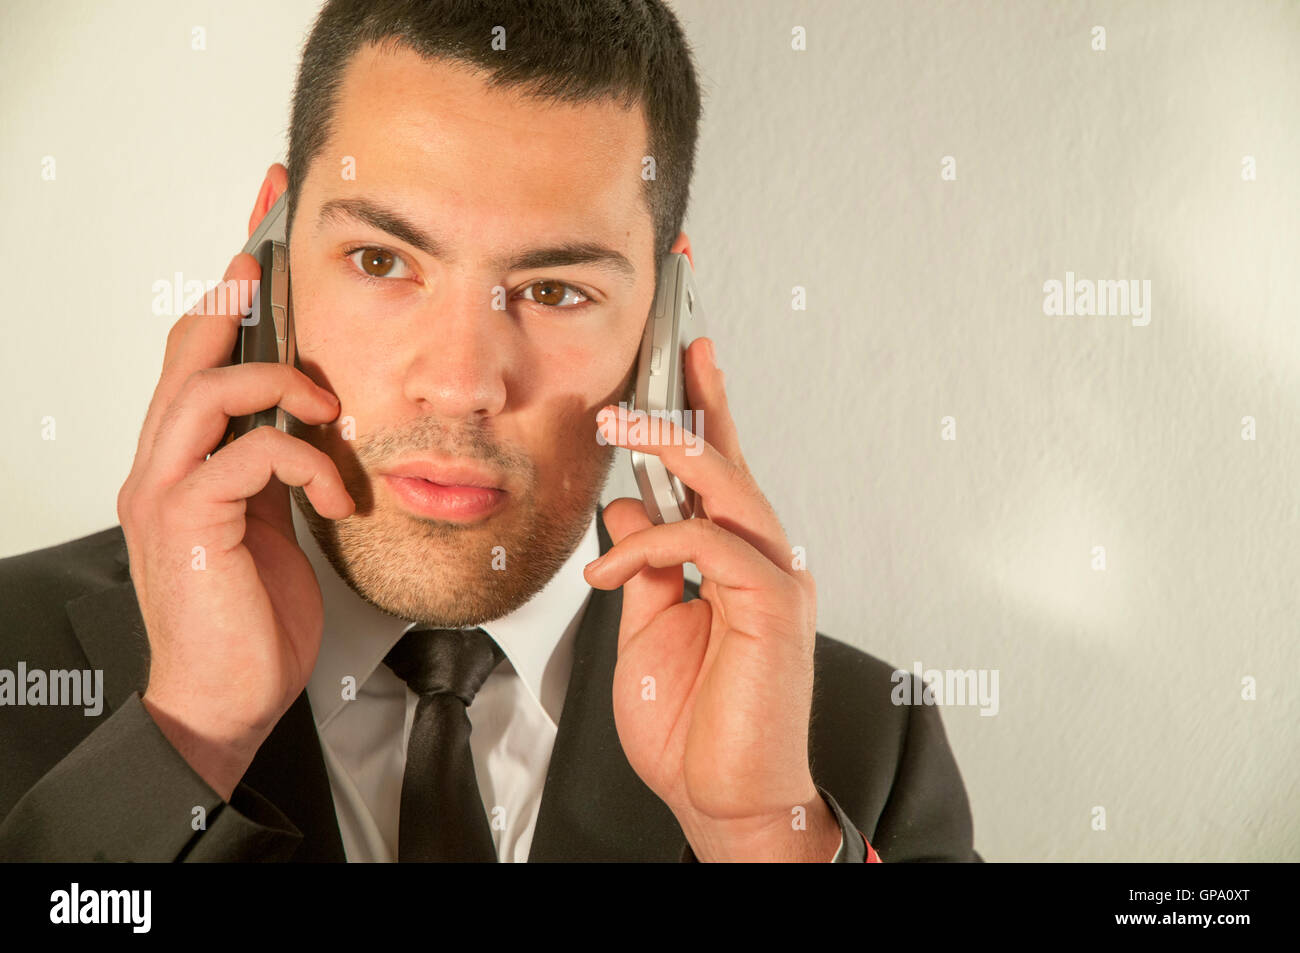 Young man using two mobiles phones. Stock Photo